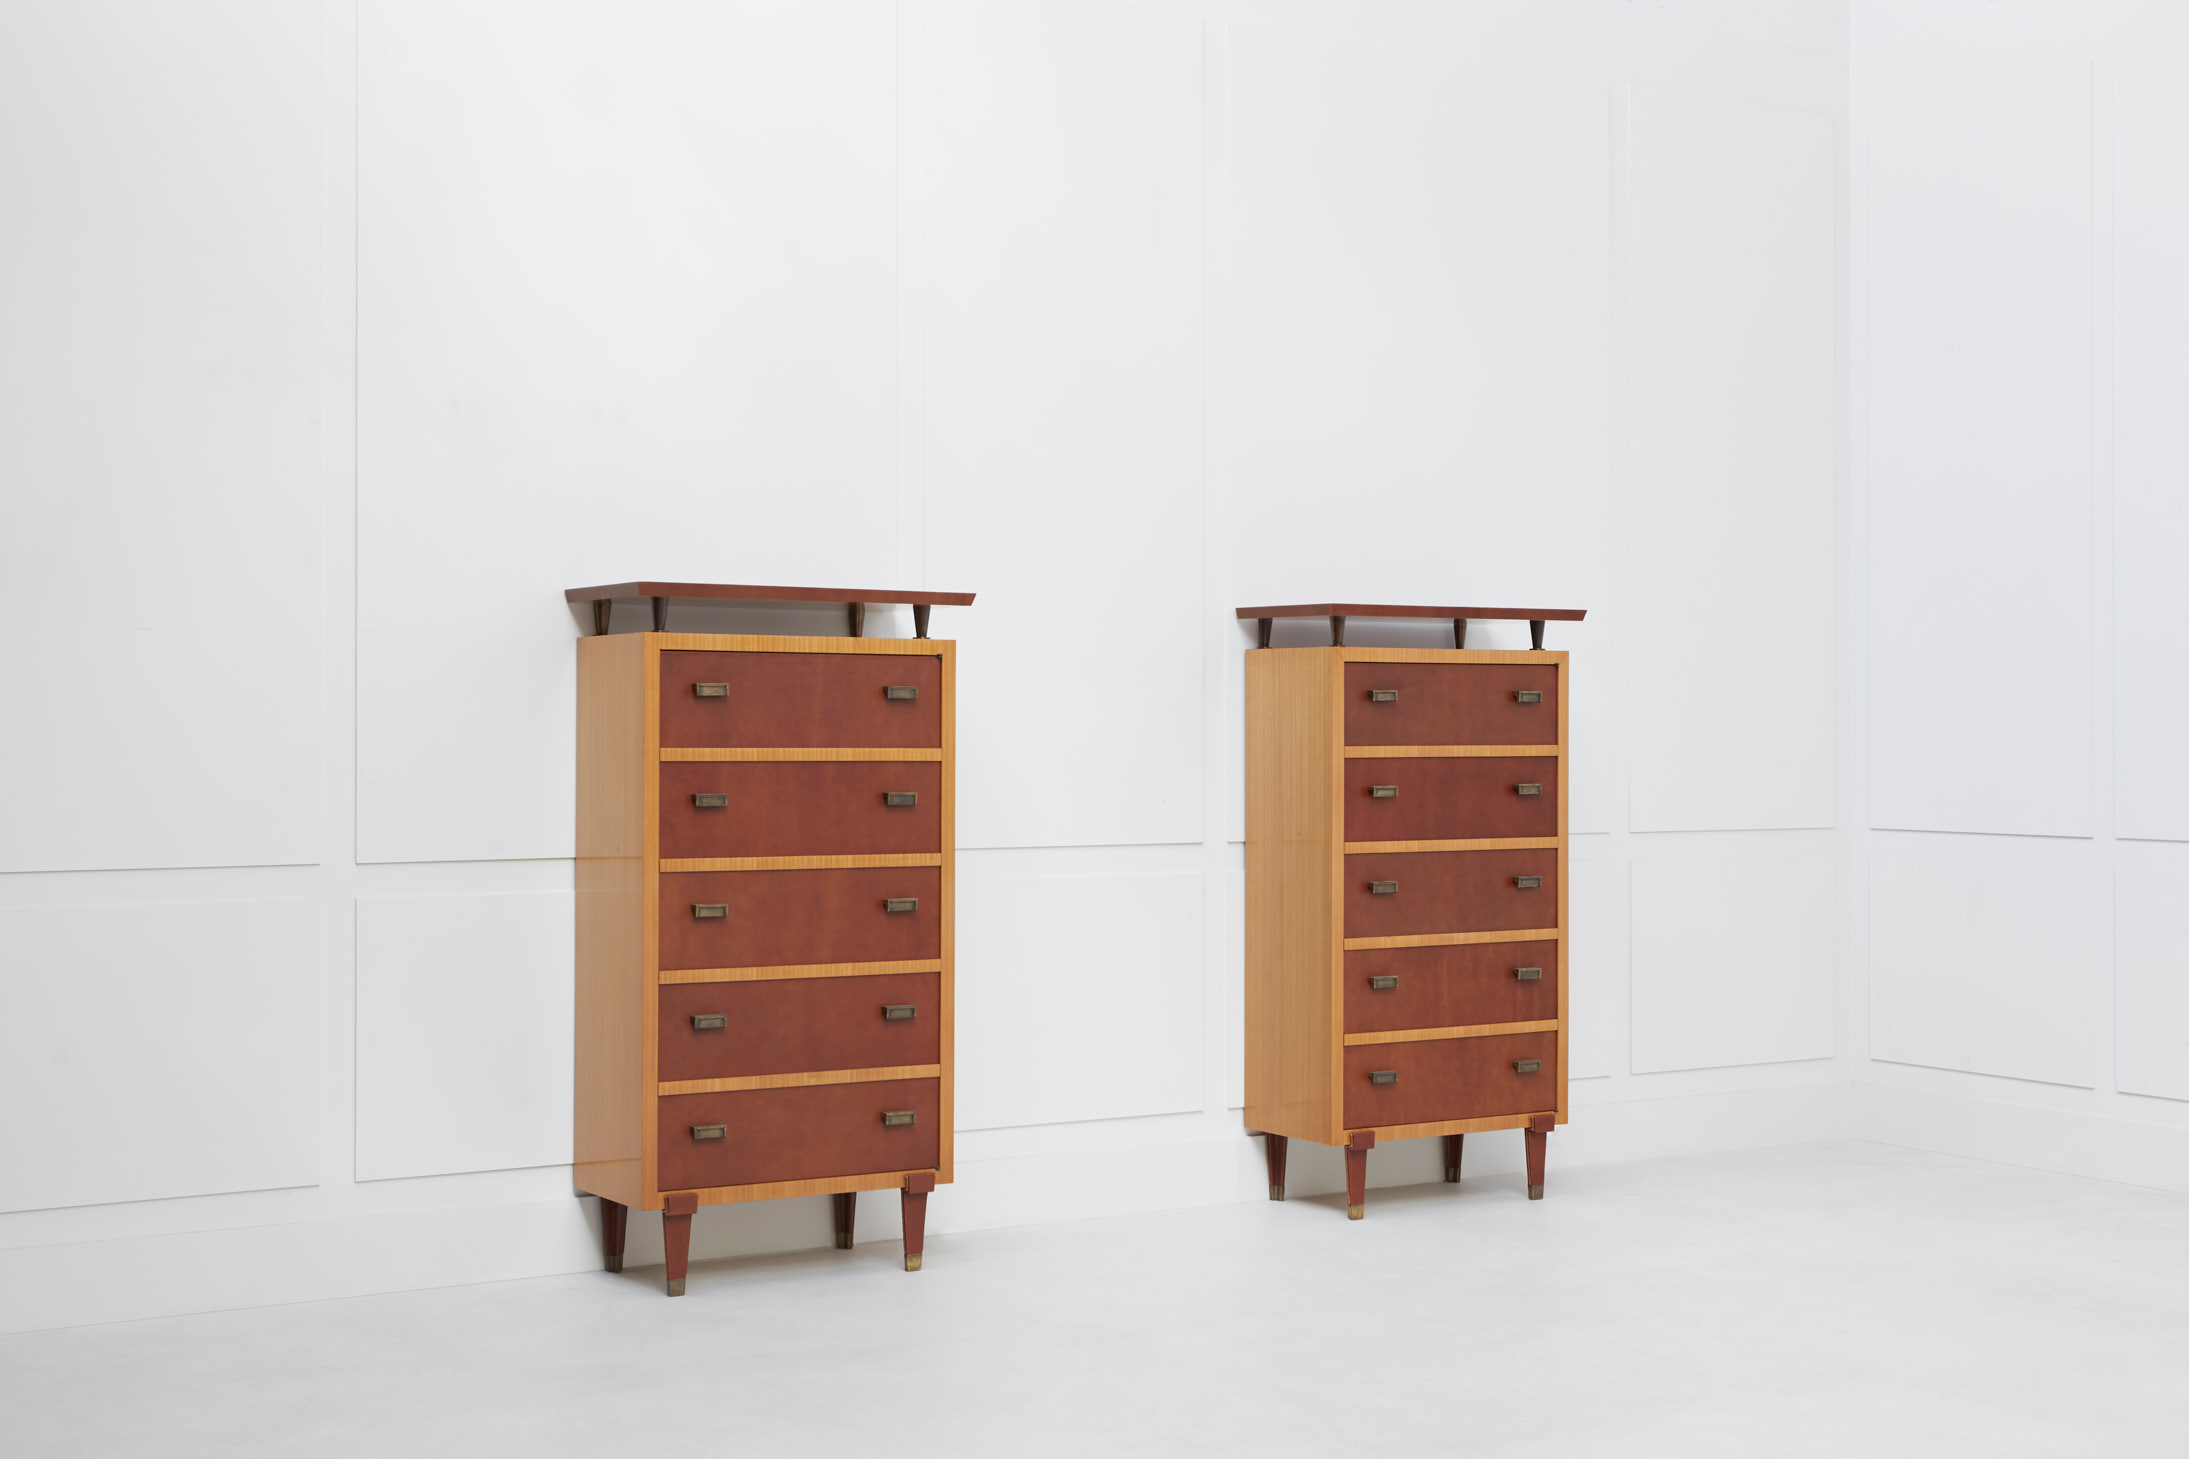 Jacques Quinet, Pair of chests, vue 01